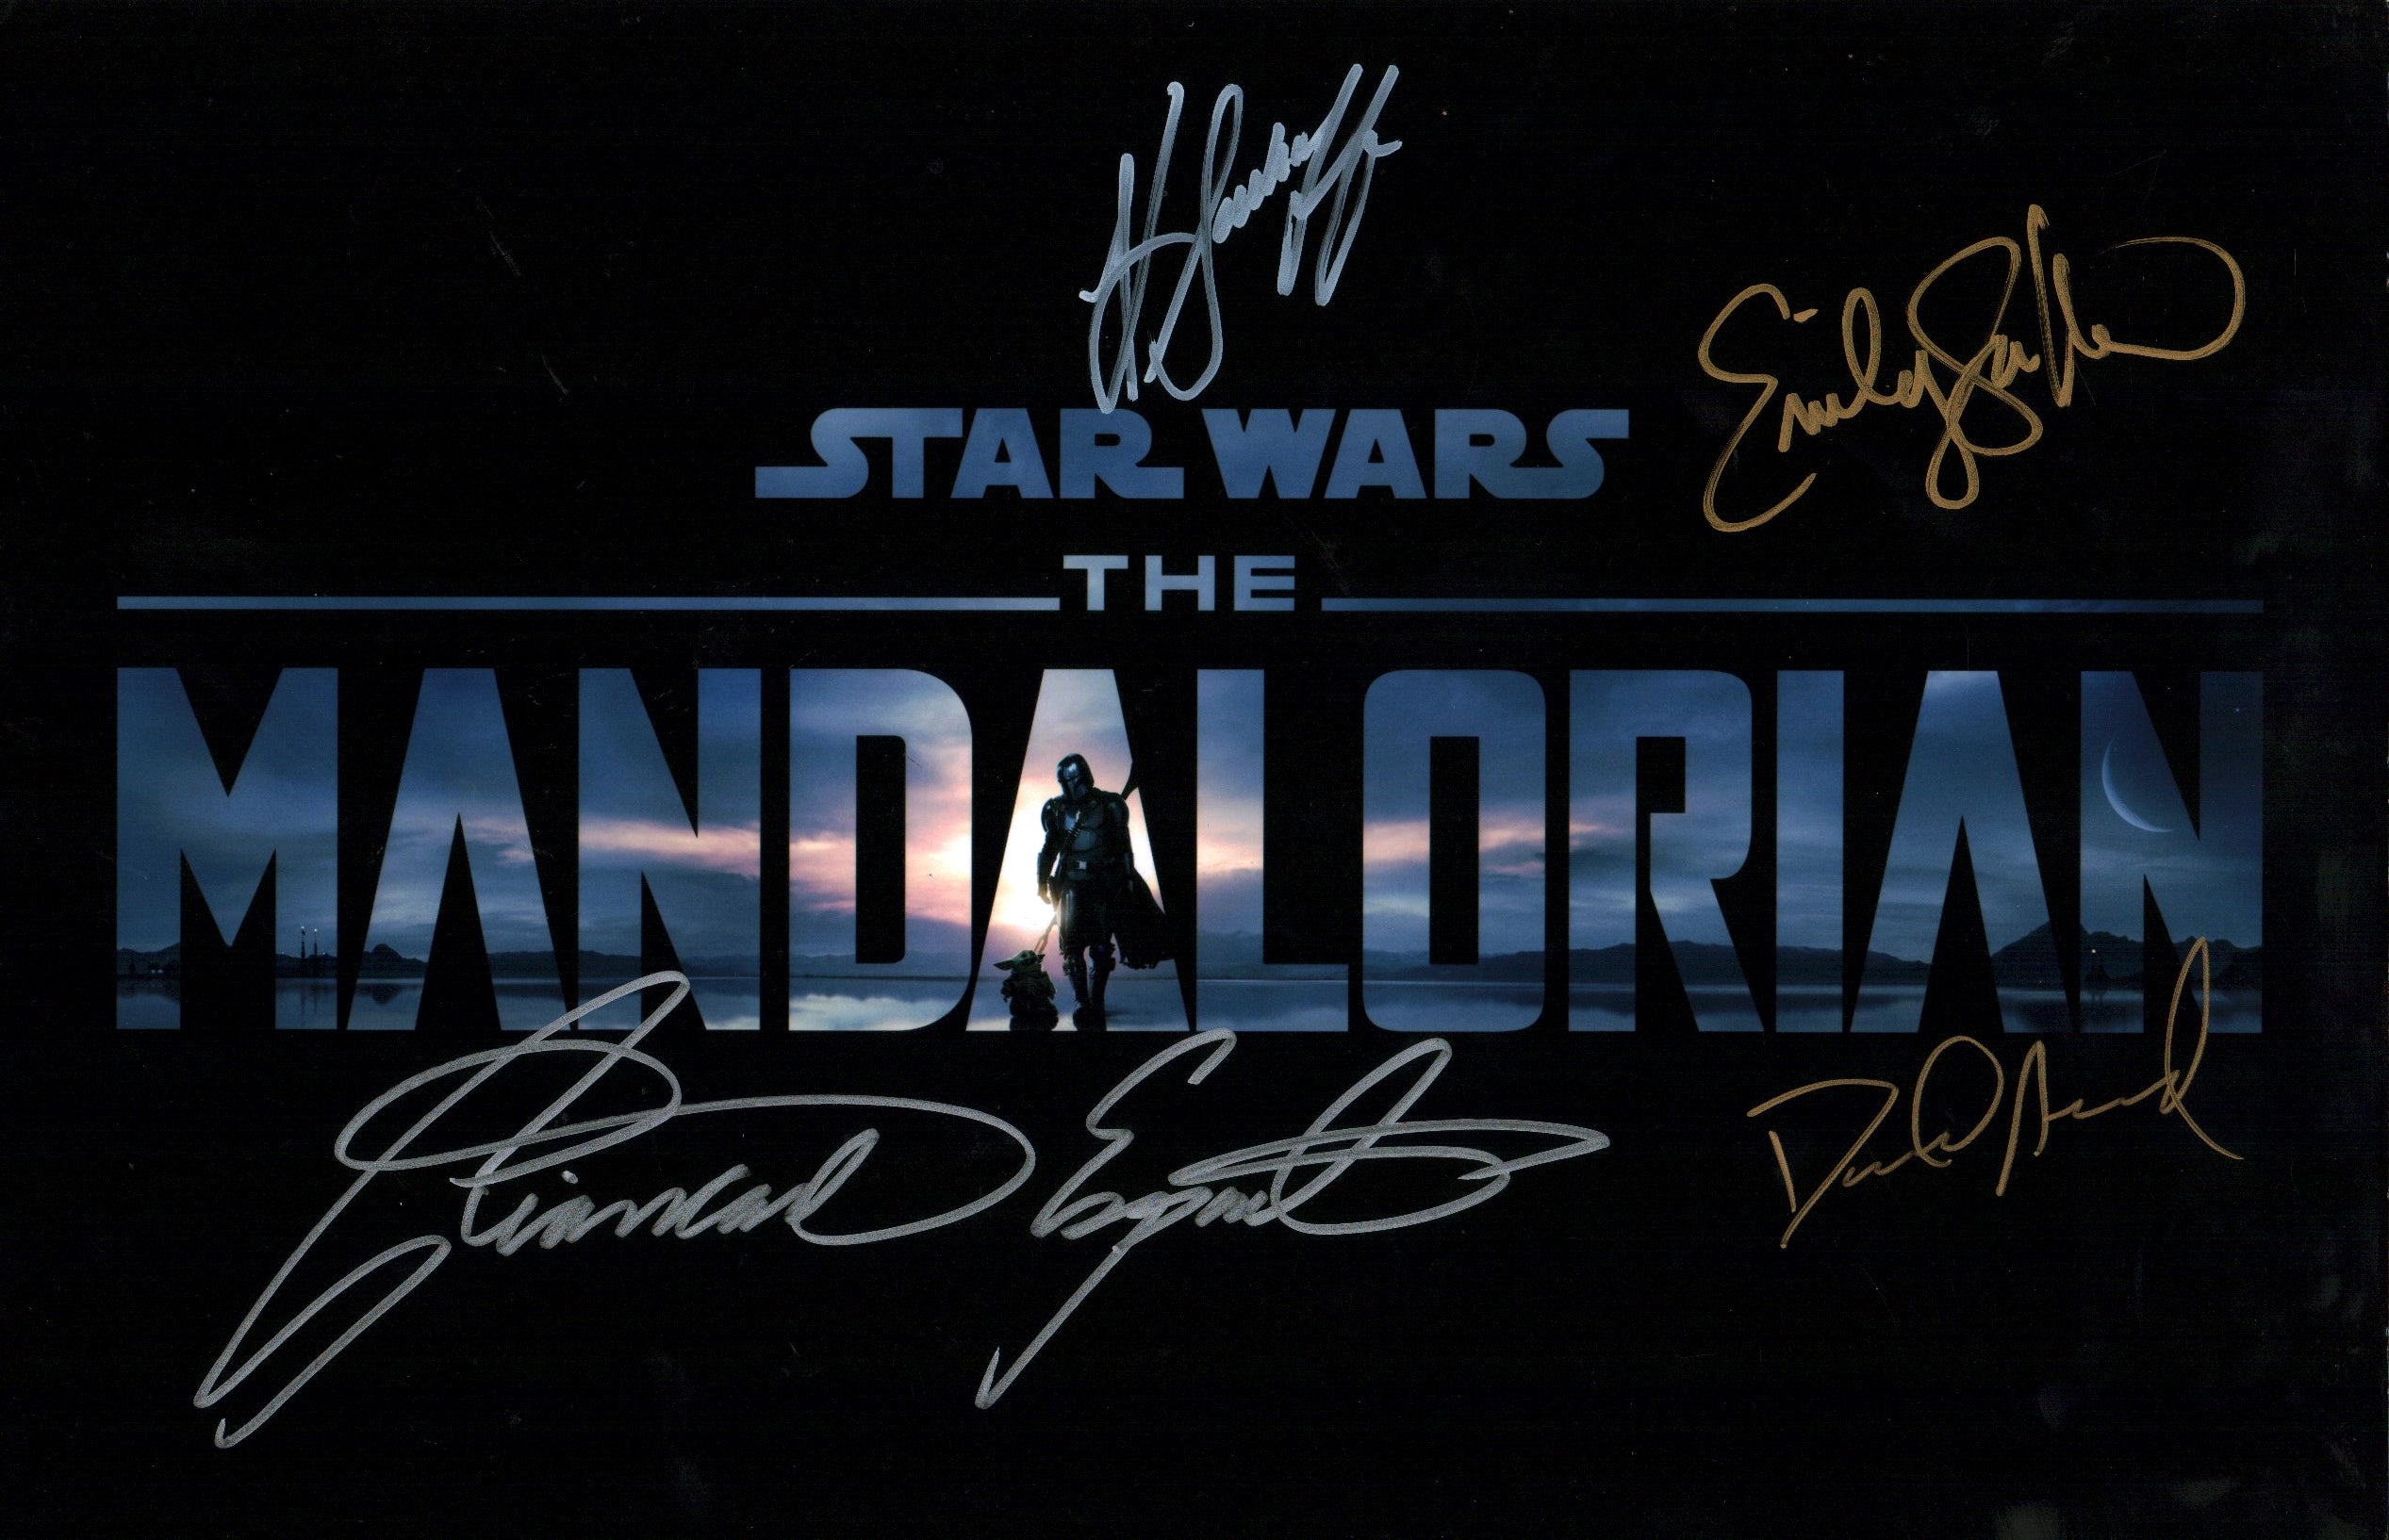 Star Wars The Mandalorian 11x17 Photo Poster Signed Autograph Acord Esposito Sackhoff Swallow JSA Certified COA GalaxyCon